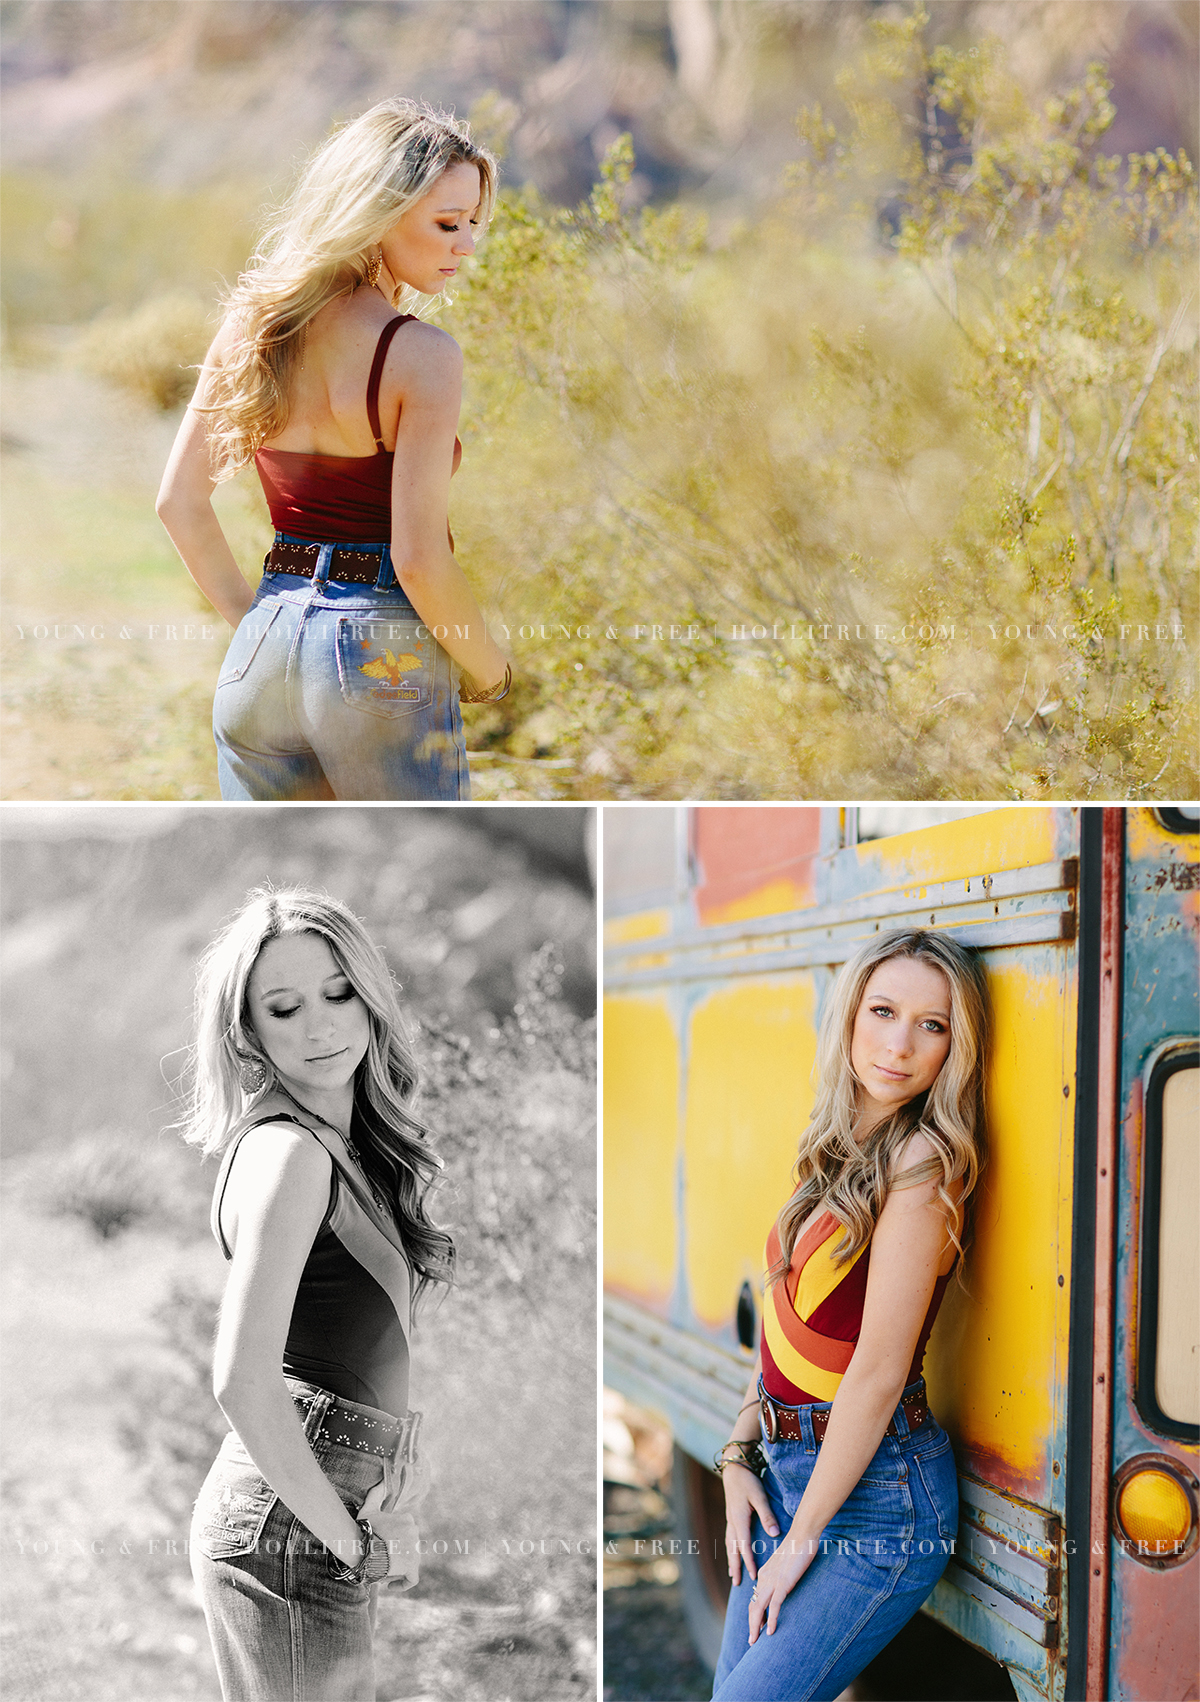 Rustic and Nature Senior Pictures in a Vegas Ghost Town by Oregon Senior Photographer, Holli True